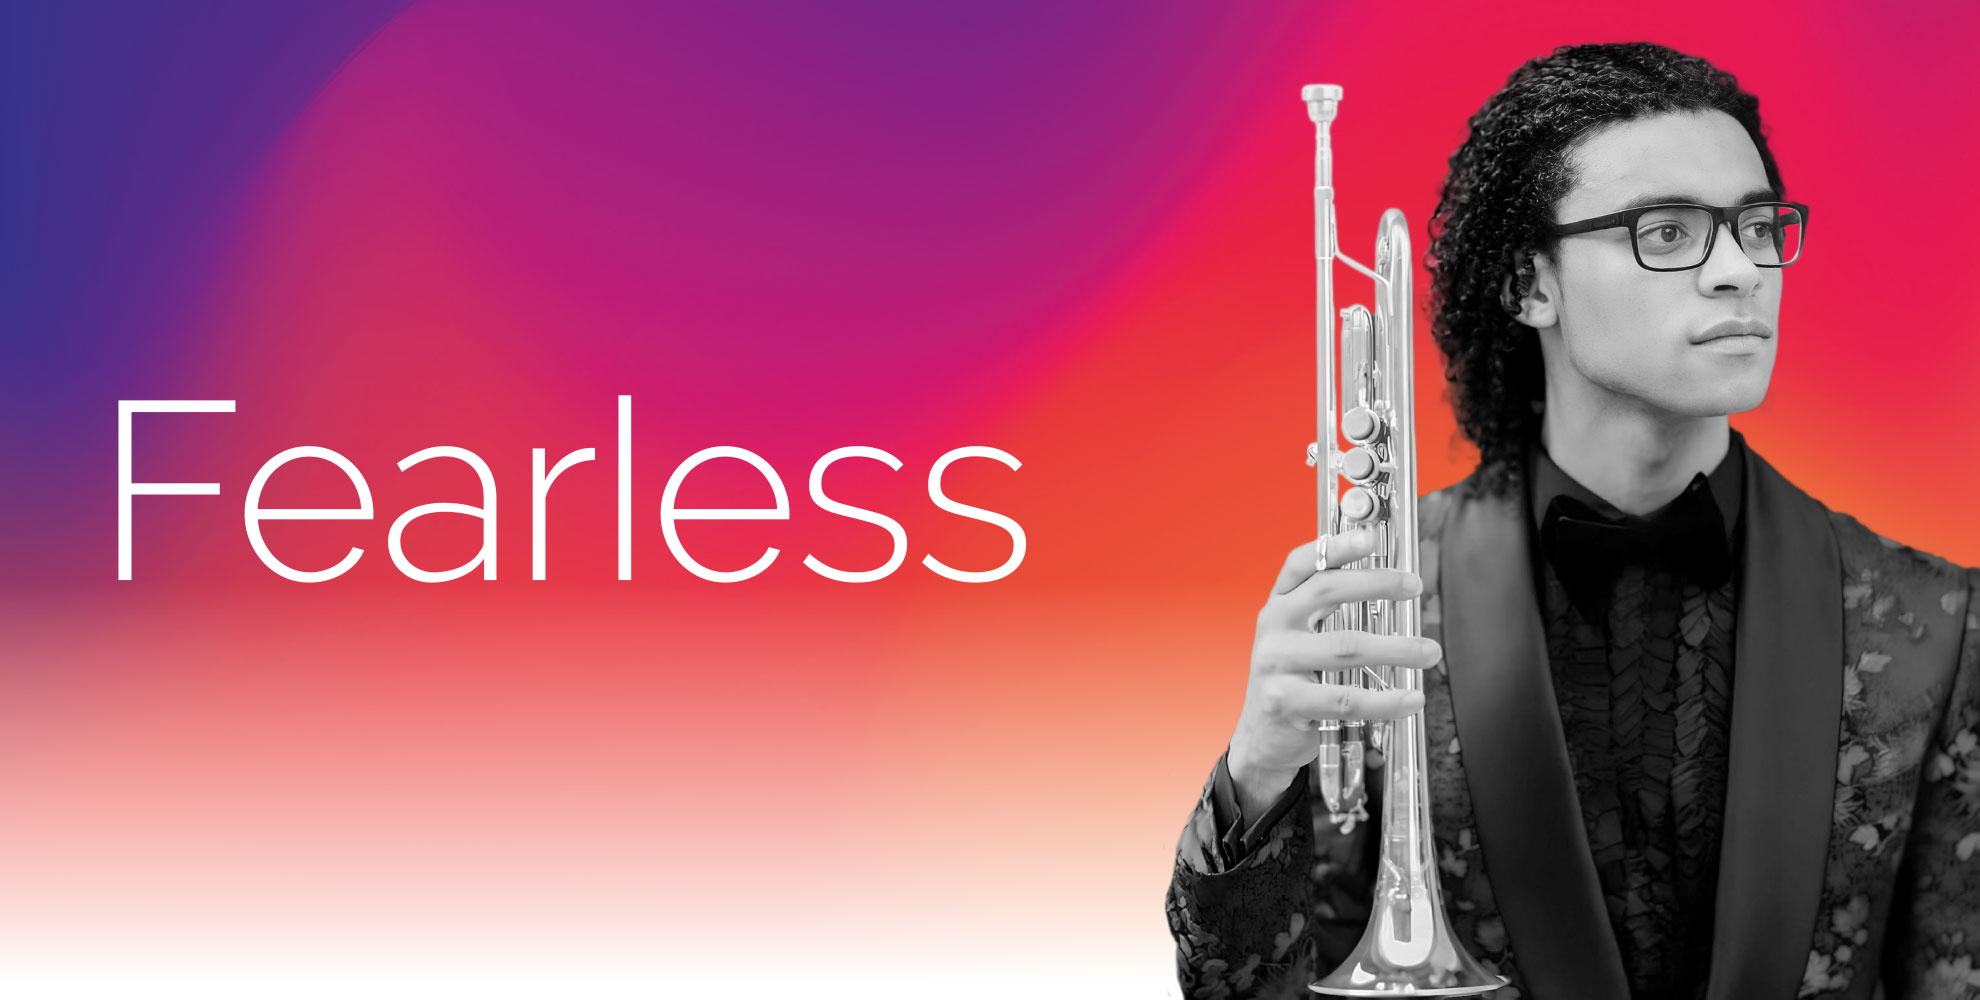 Fearless with William Leathers, piano & trumpet